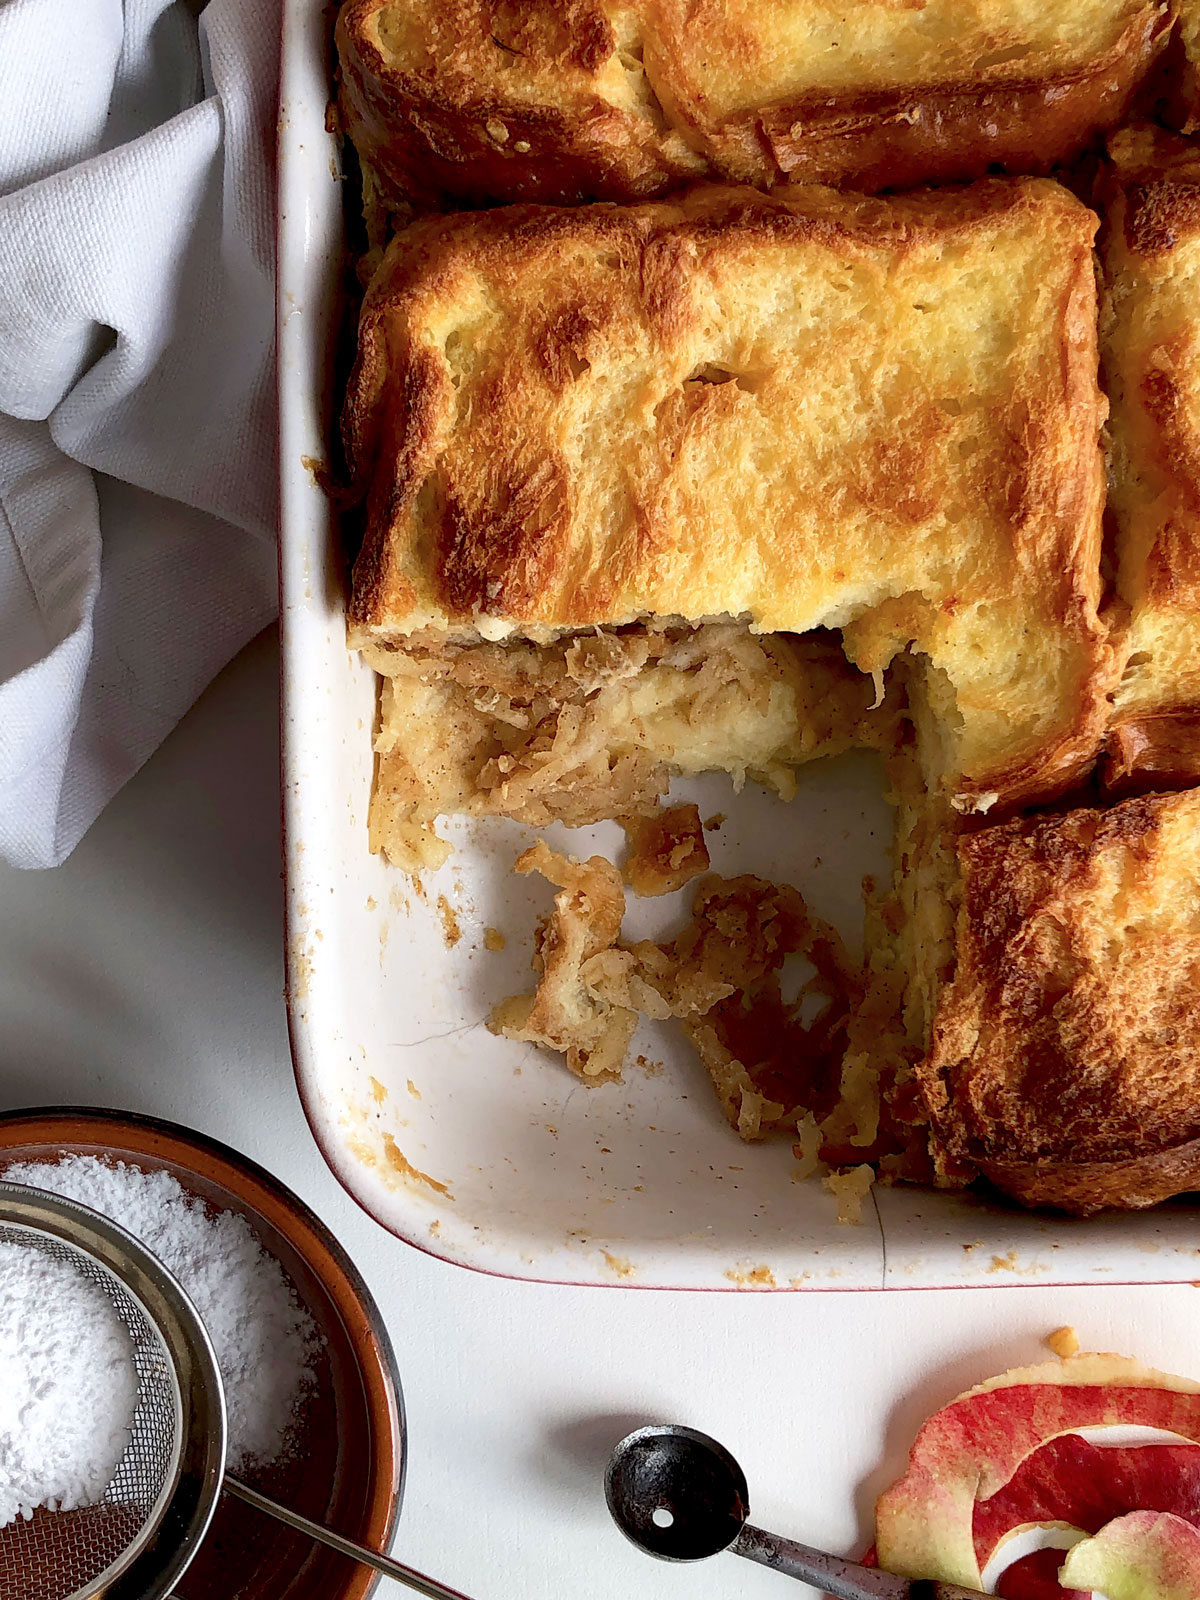 Baked bread pudding with apples.